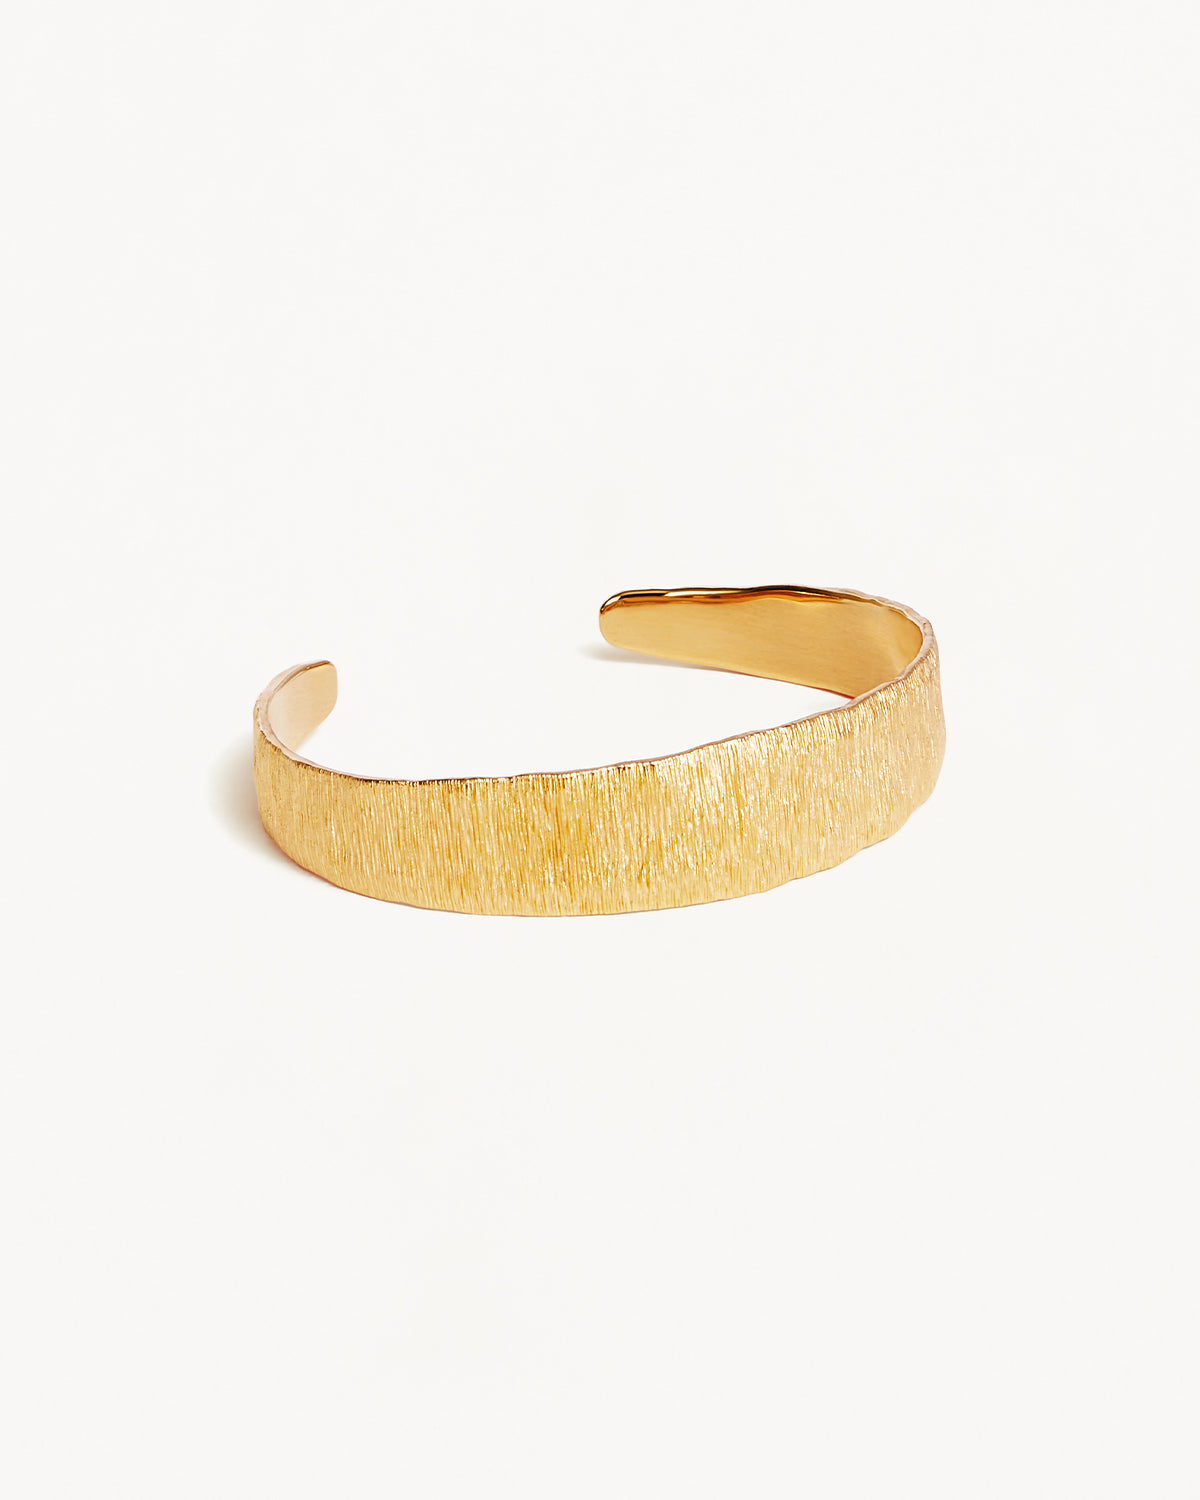 By Charlotte Woven Light Cuff, Gold